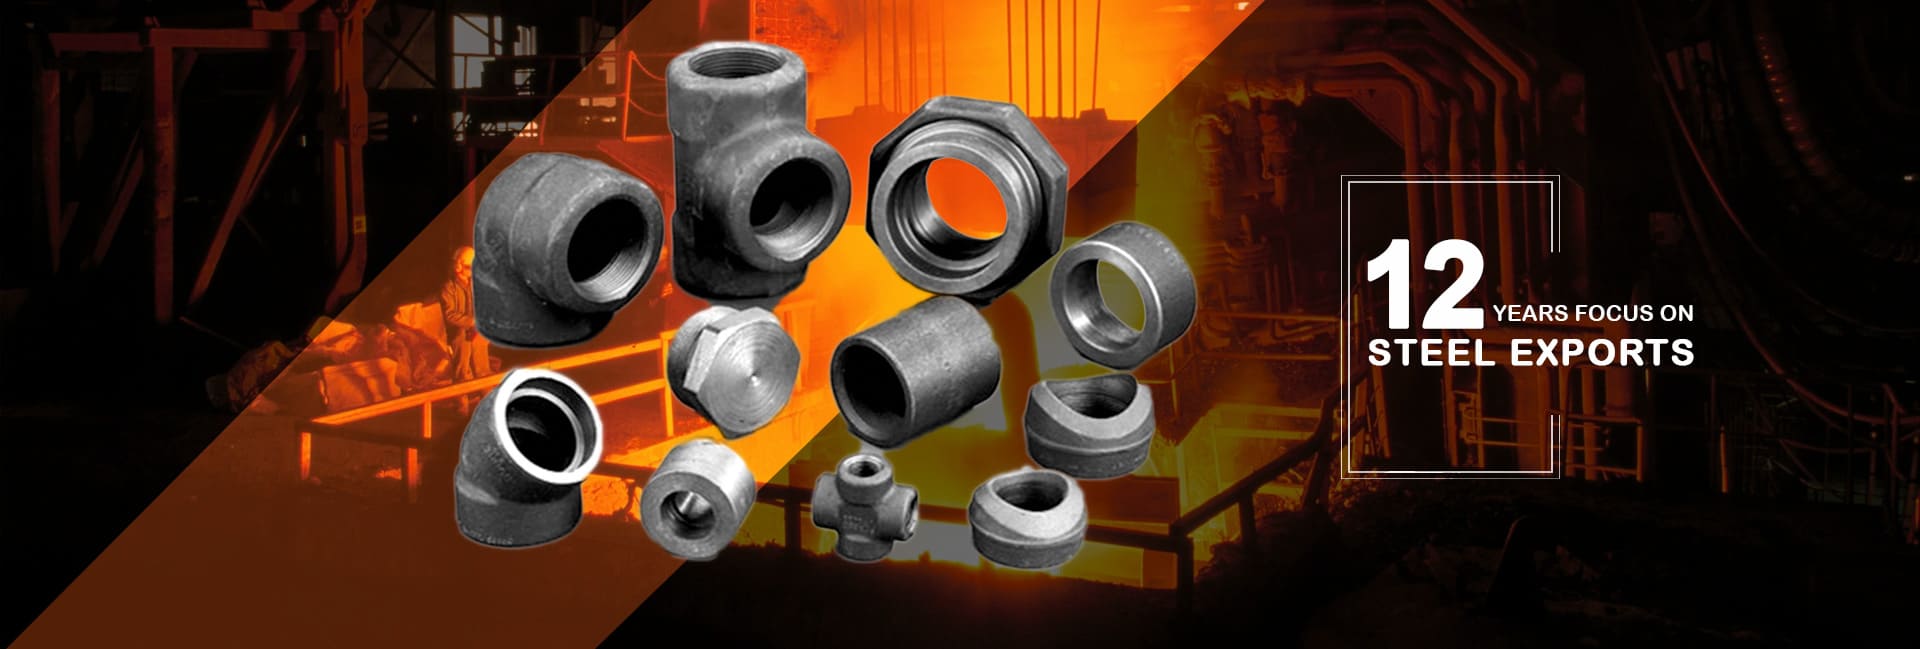 Alloy Steel F91 Forged Fittings